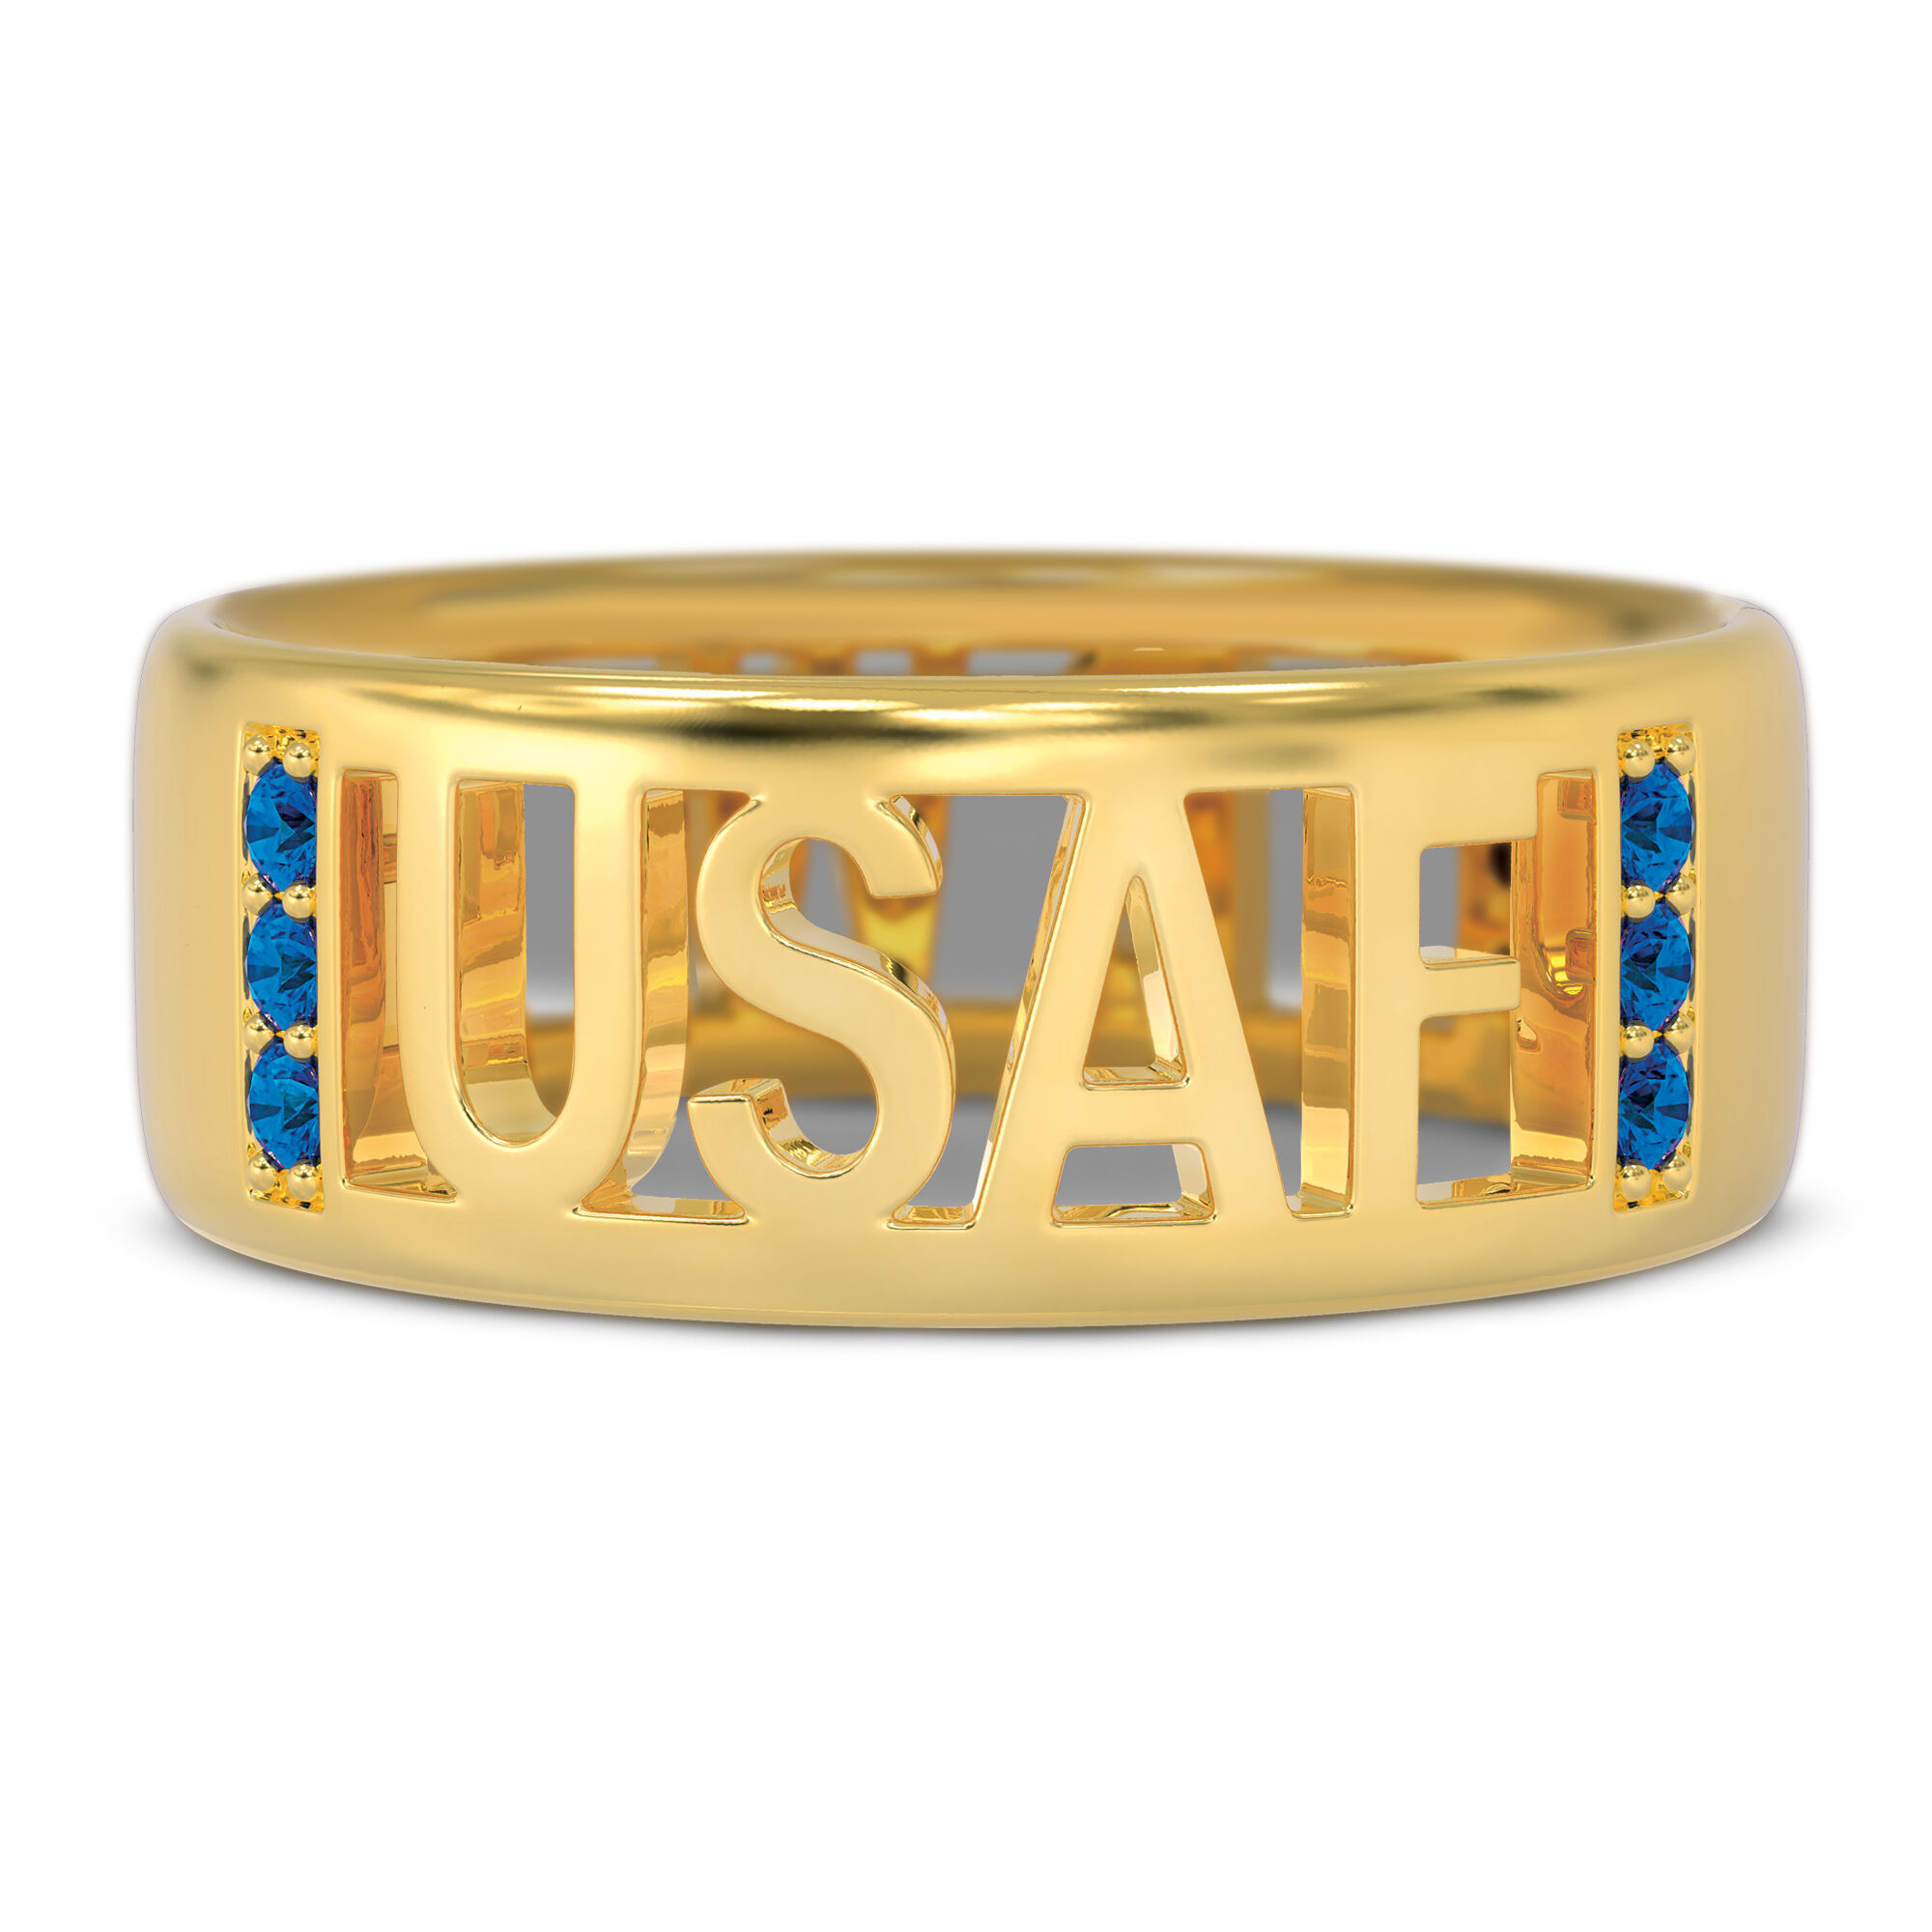 Military Initial Ring 10234 0049 a main